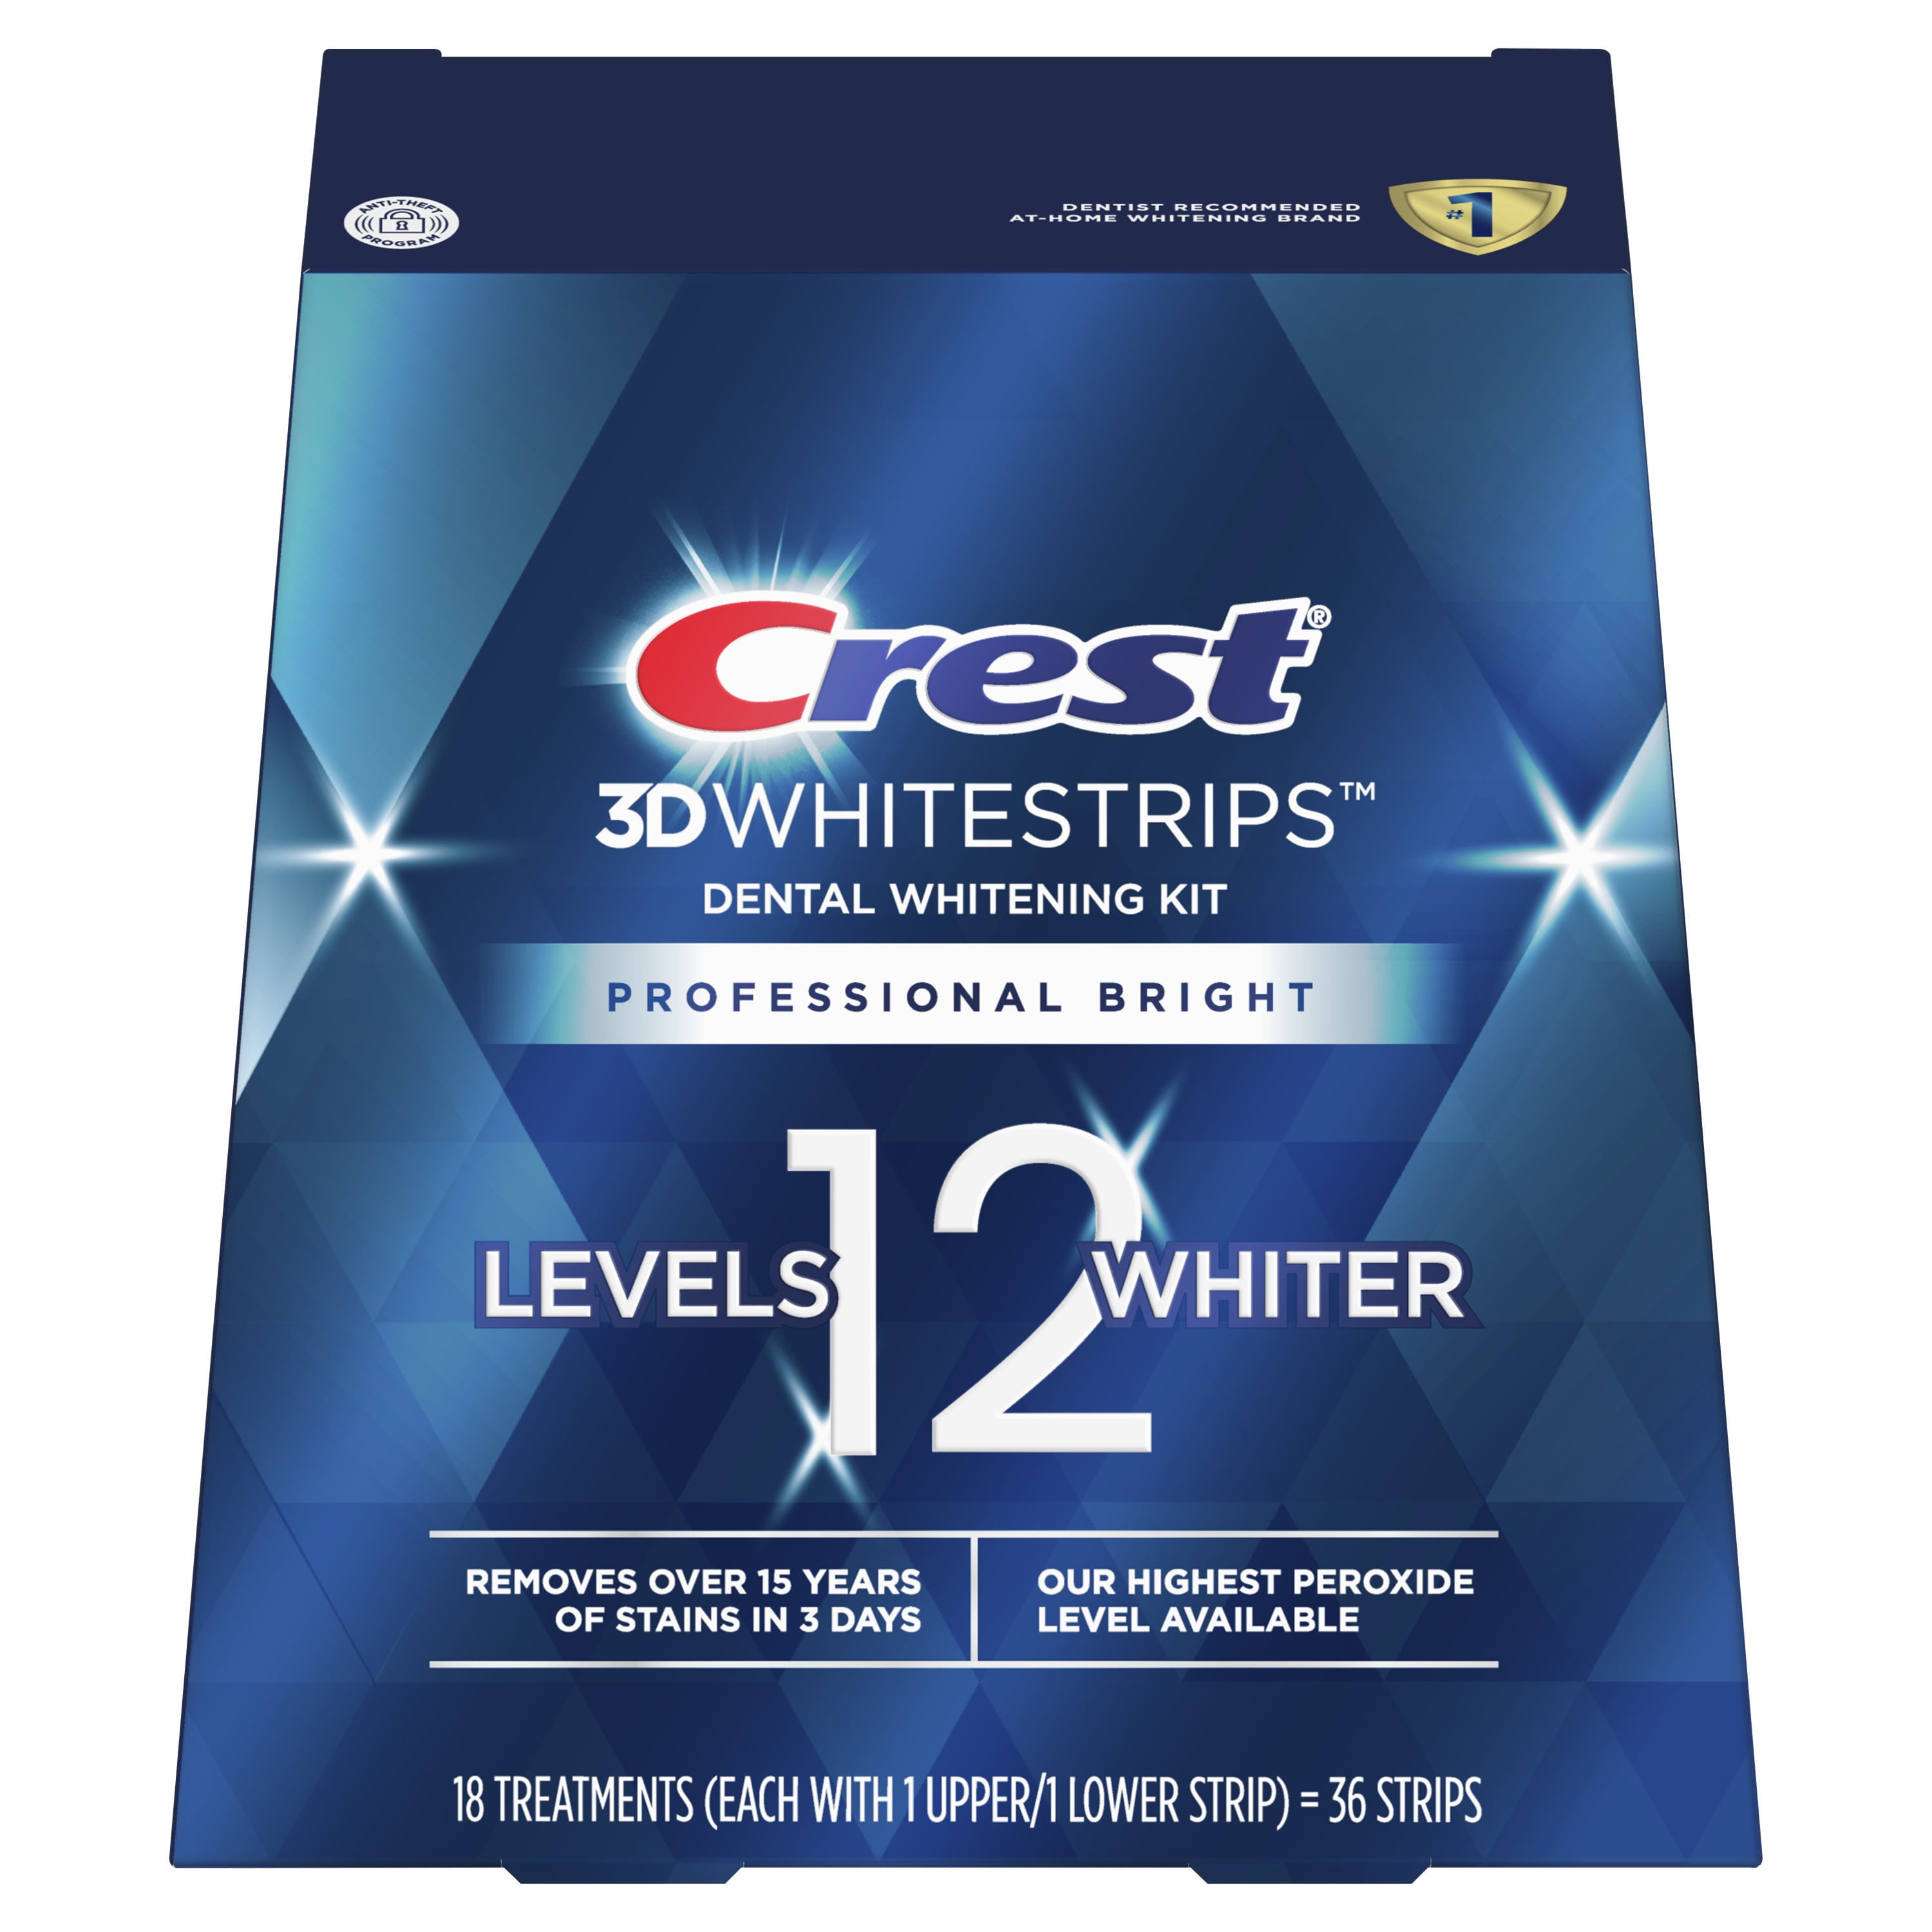 Crest 3DWhitestrips Professional Bright At-home Teeth Whitening Kit, 18 Treatments